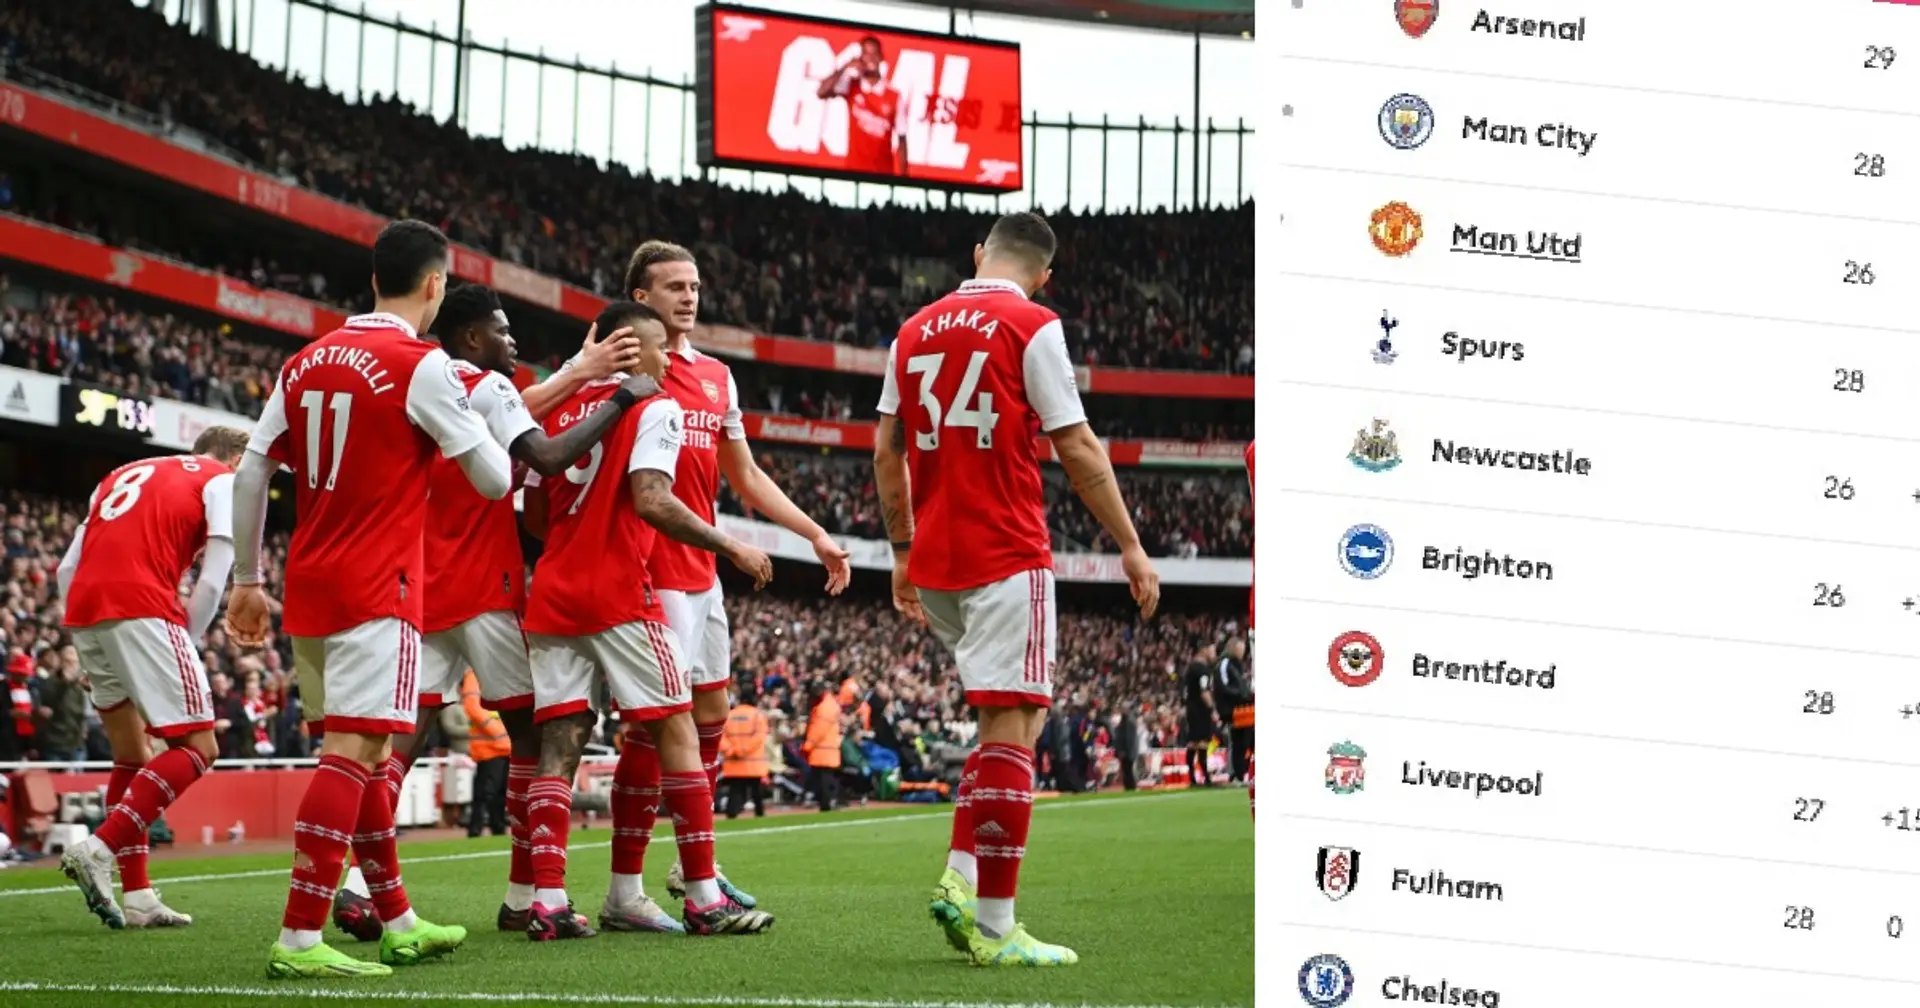 Arsenal restore lead over Man City: Updated Premier League standings after Leeds win